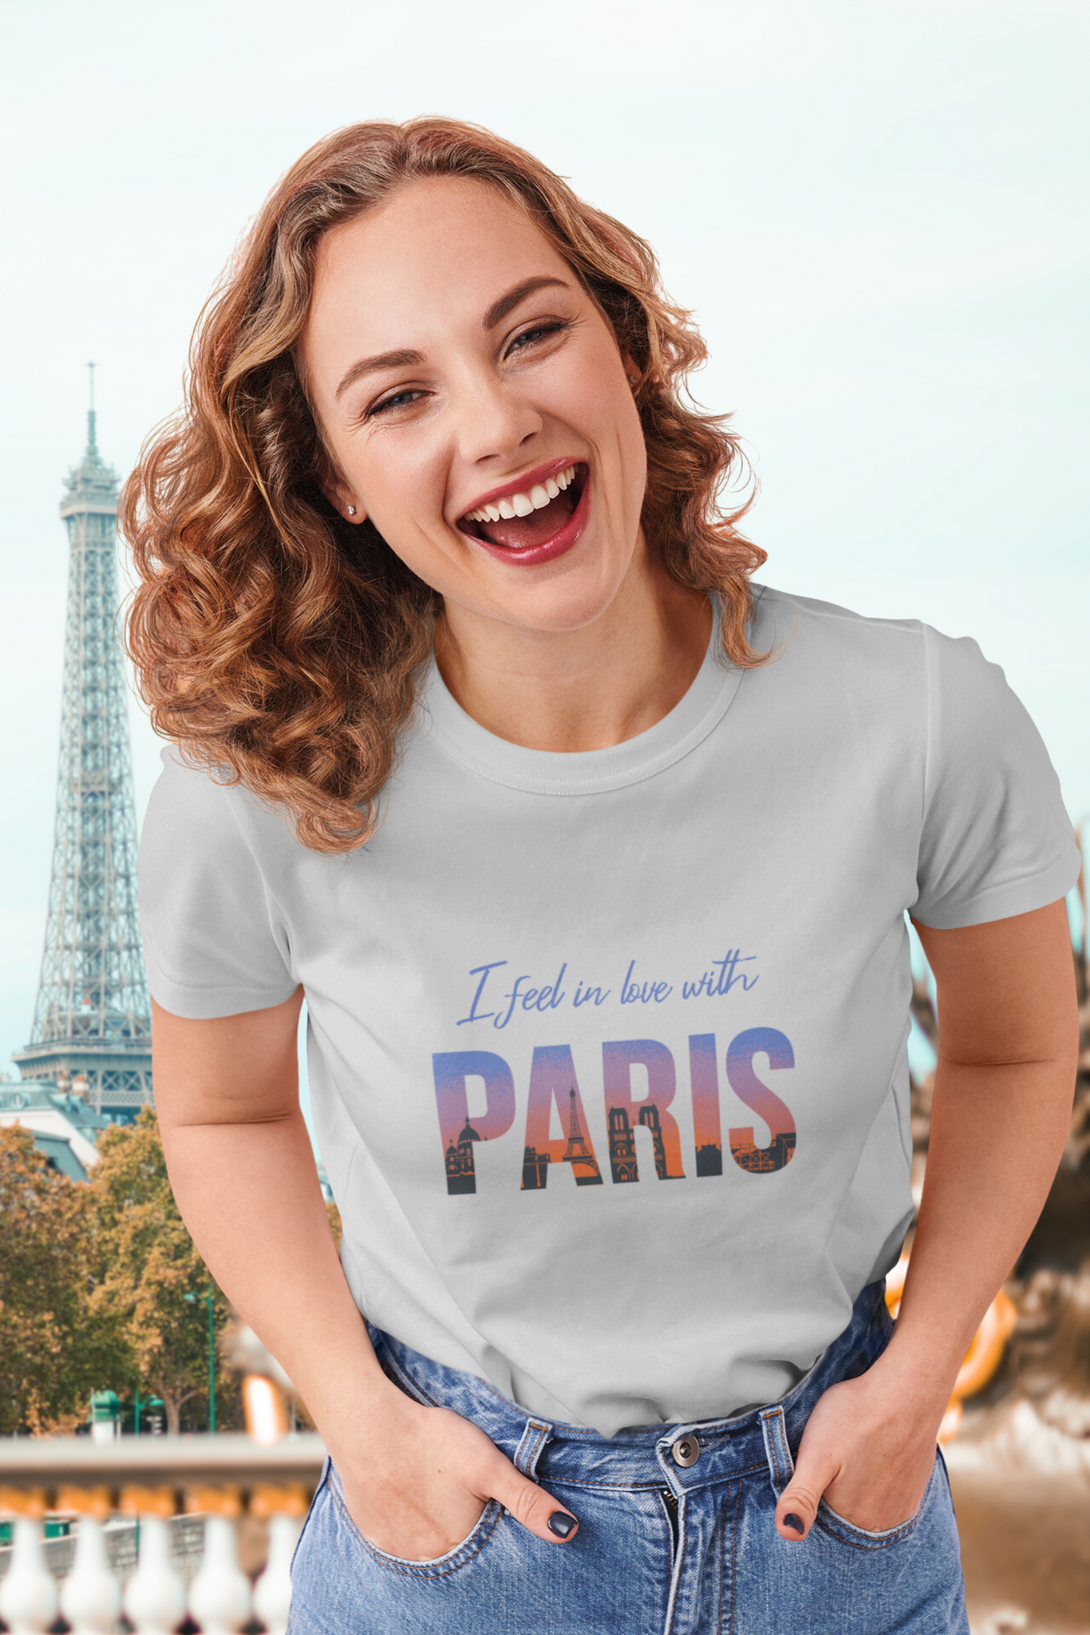 In Love With Paris Printed T-Shirt For Women - WowWaves - 5